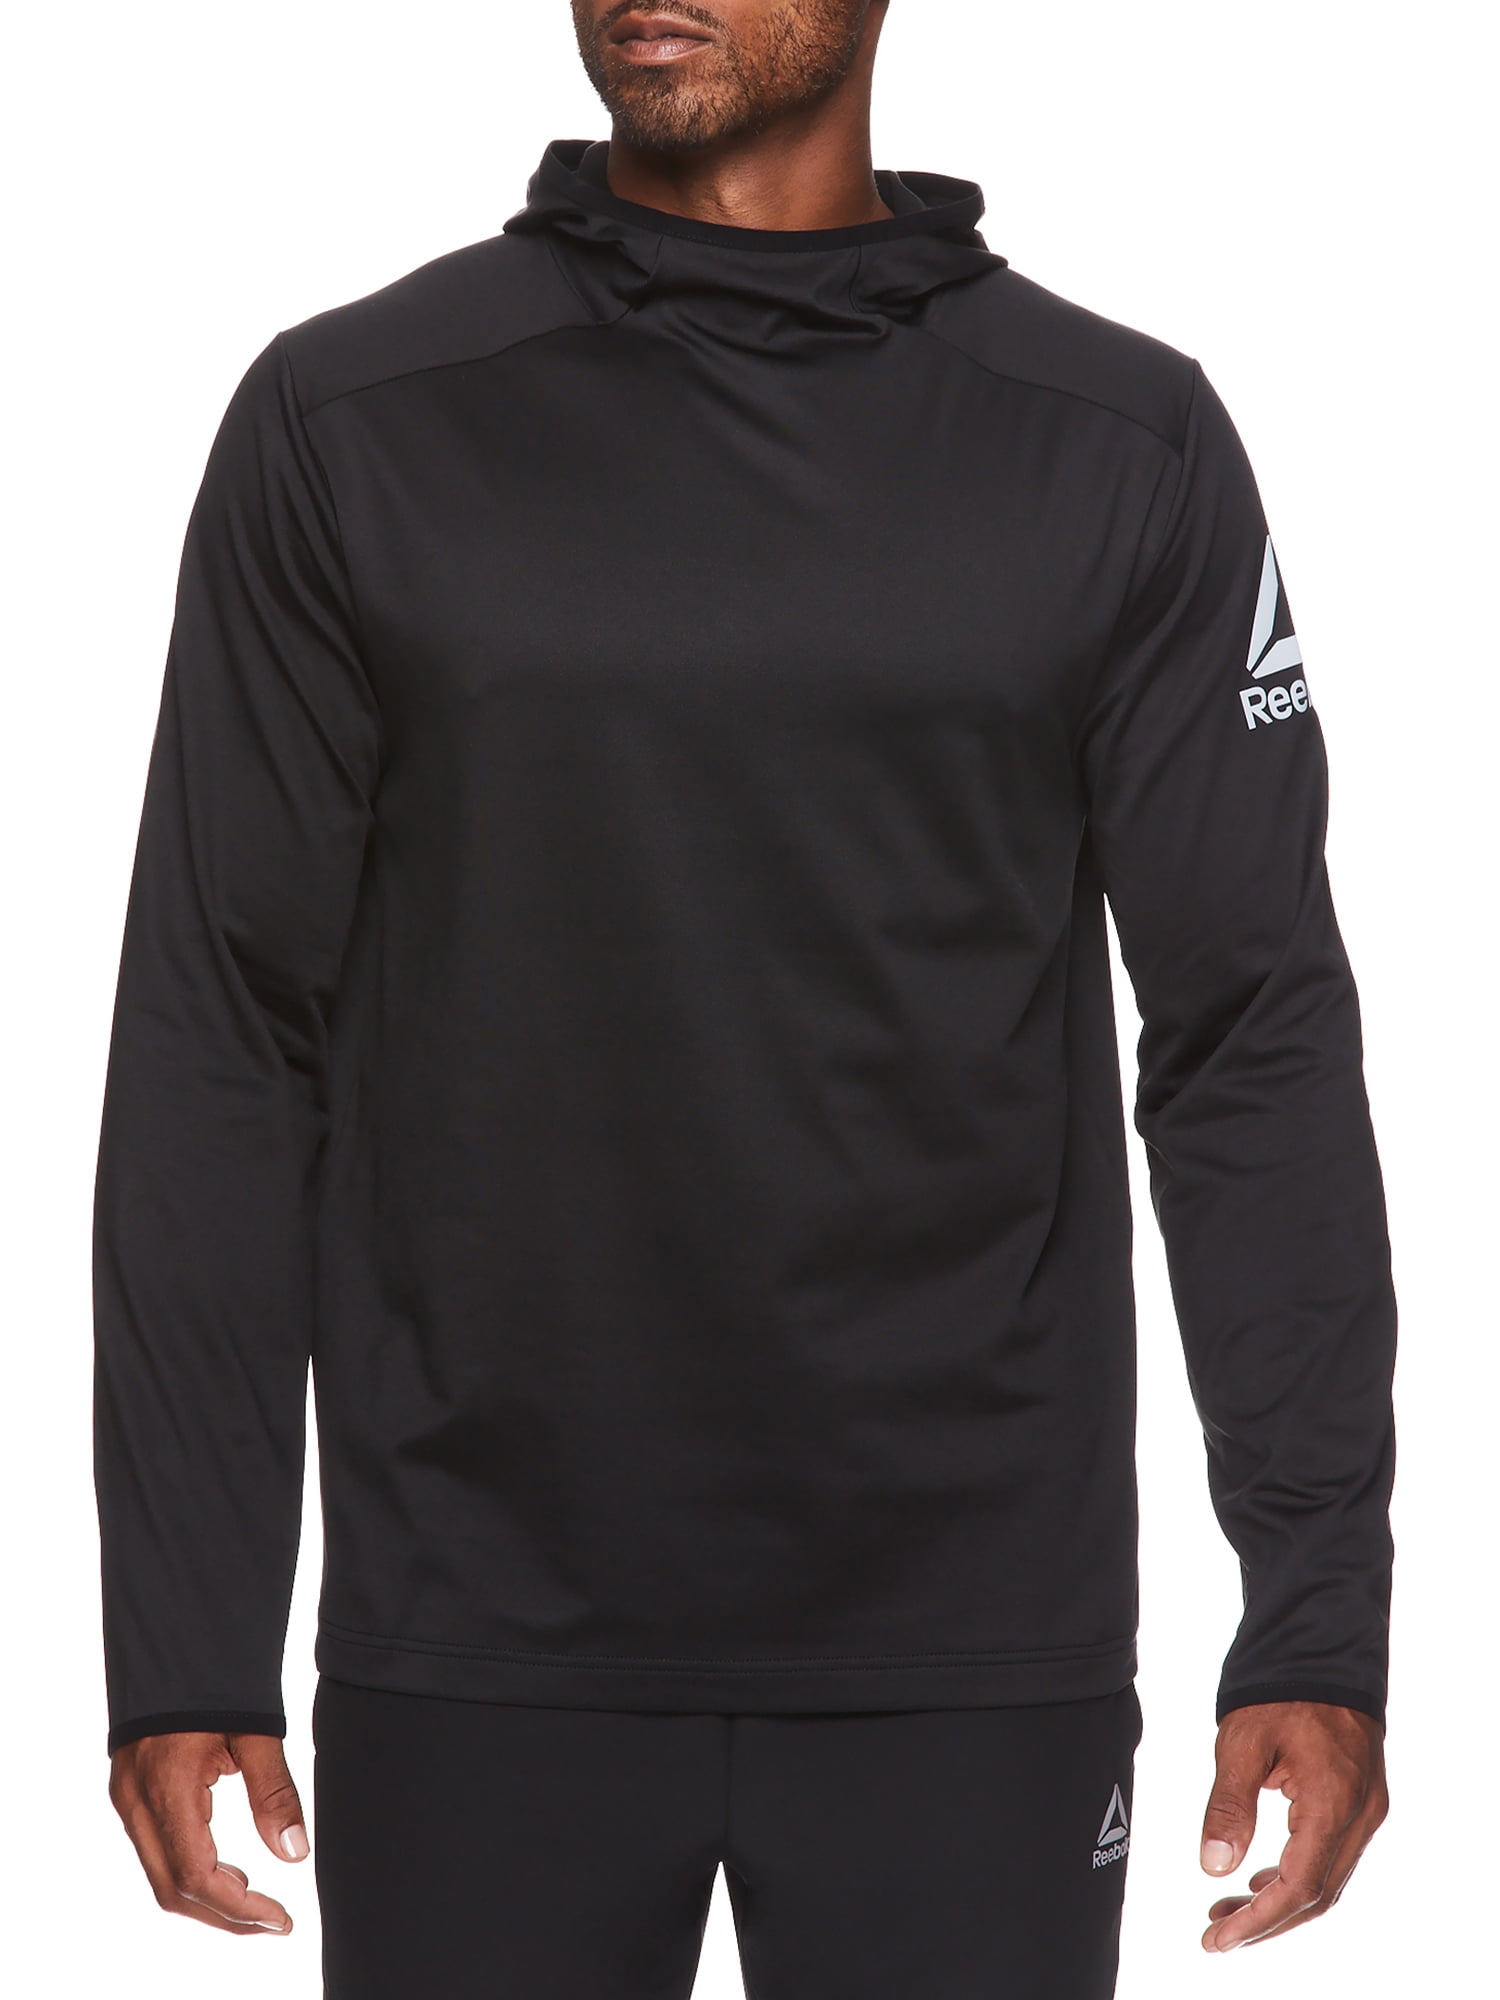 Men's and Big Men's Active Long Sleeve Training Pullover up to Size 3XL - Walmart.com